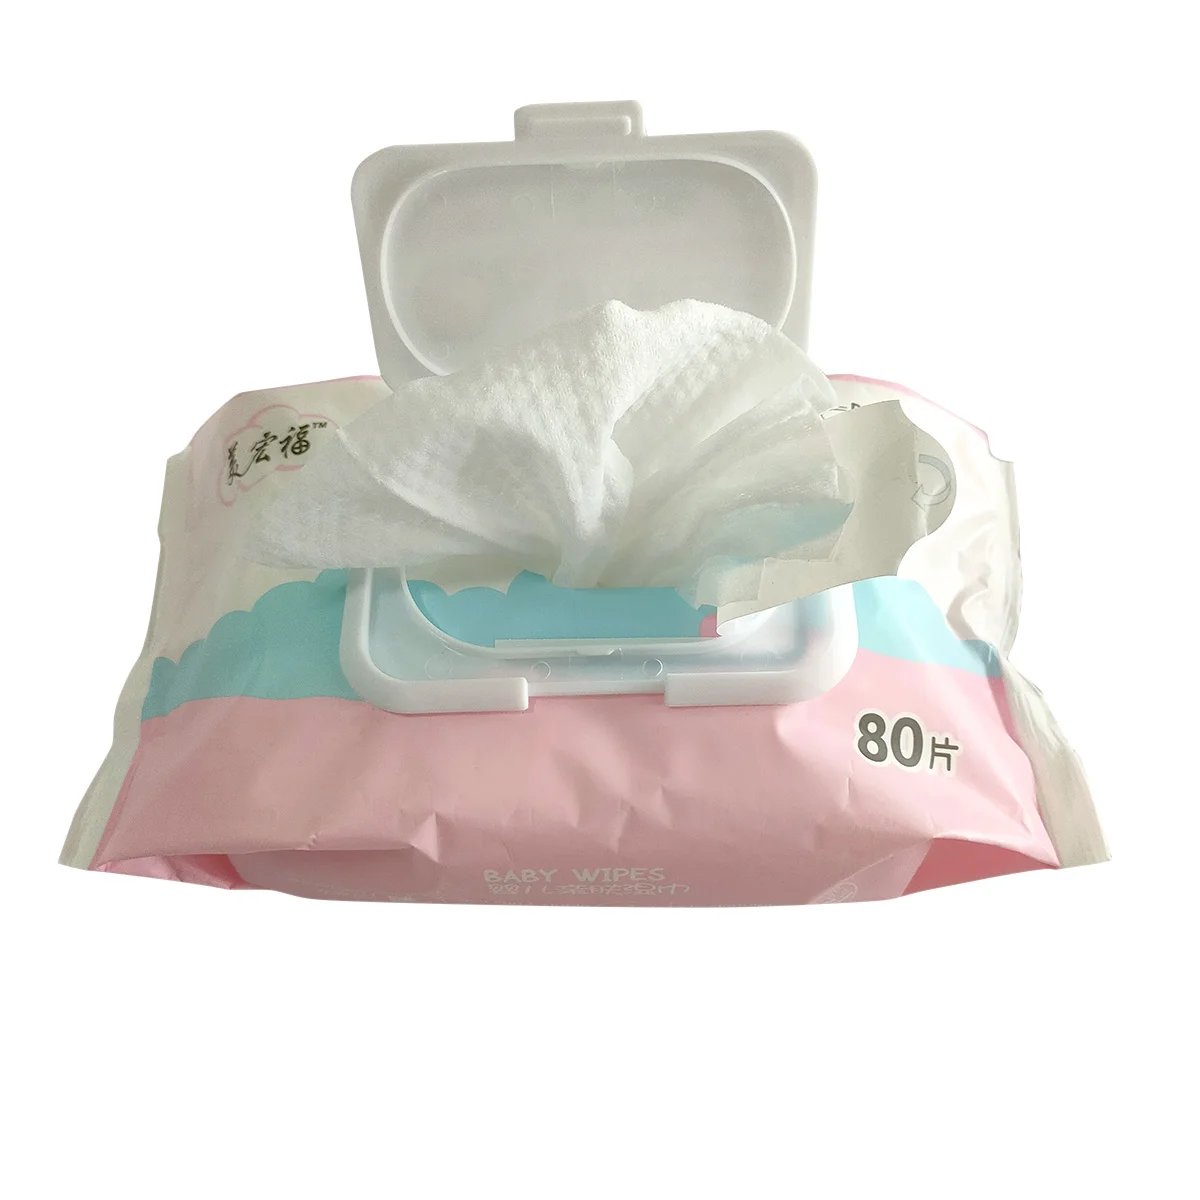 OEM High Quality Wipe Baby Wipes Stock Free Samples Manufacturers Wholesale Non Woven Disposable Baby Mouth And Hand Use